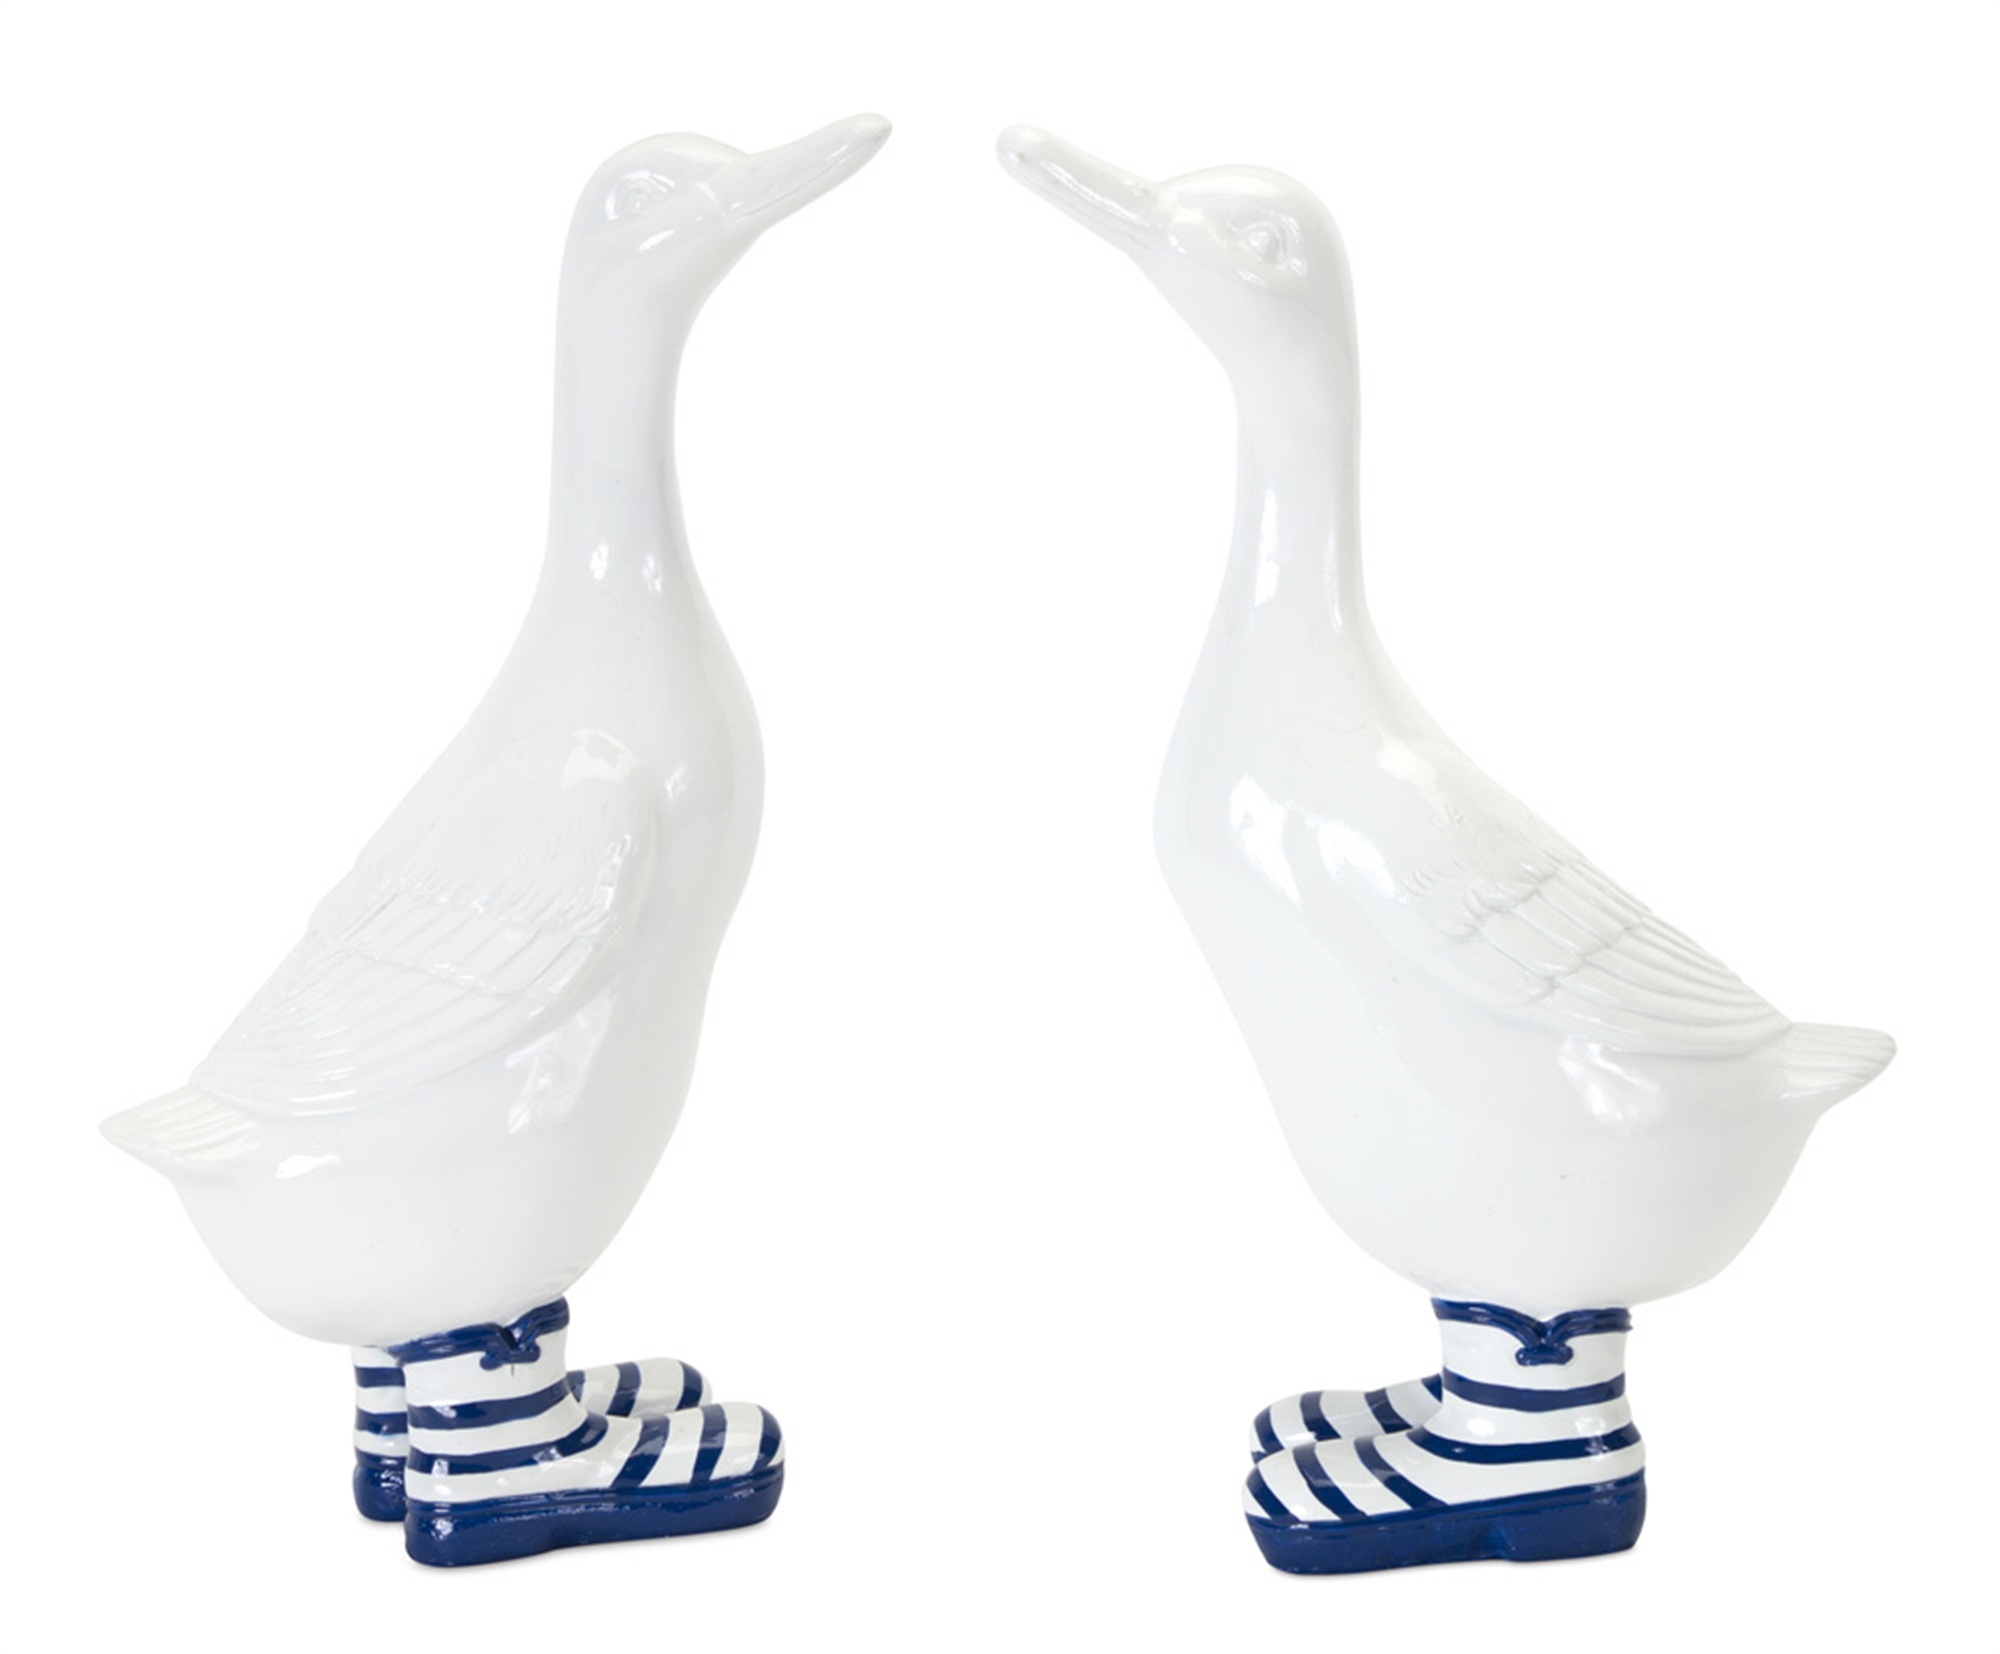 Duck With Boots (Set of 4) 10"H, 10.5"H Resin/Stone Powder